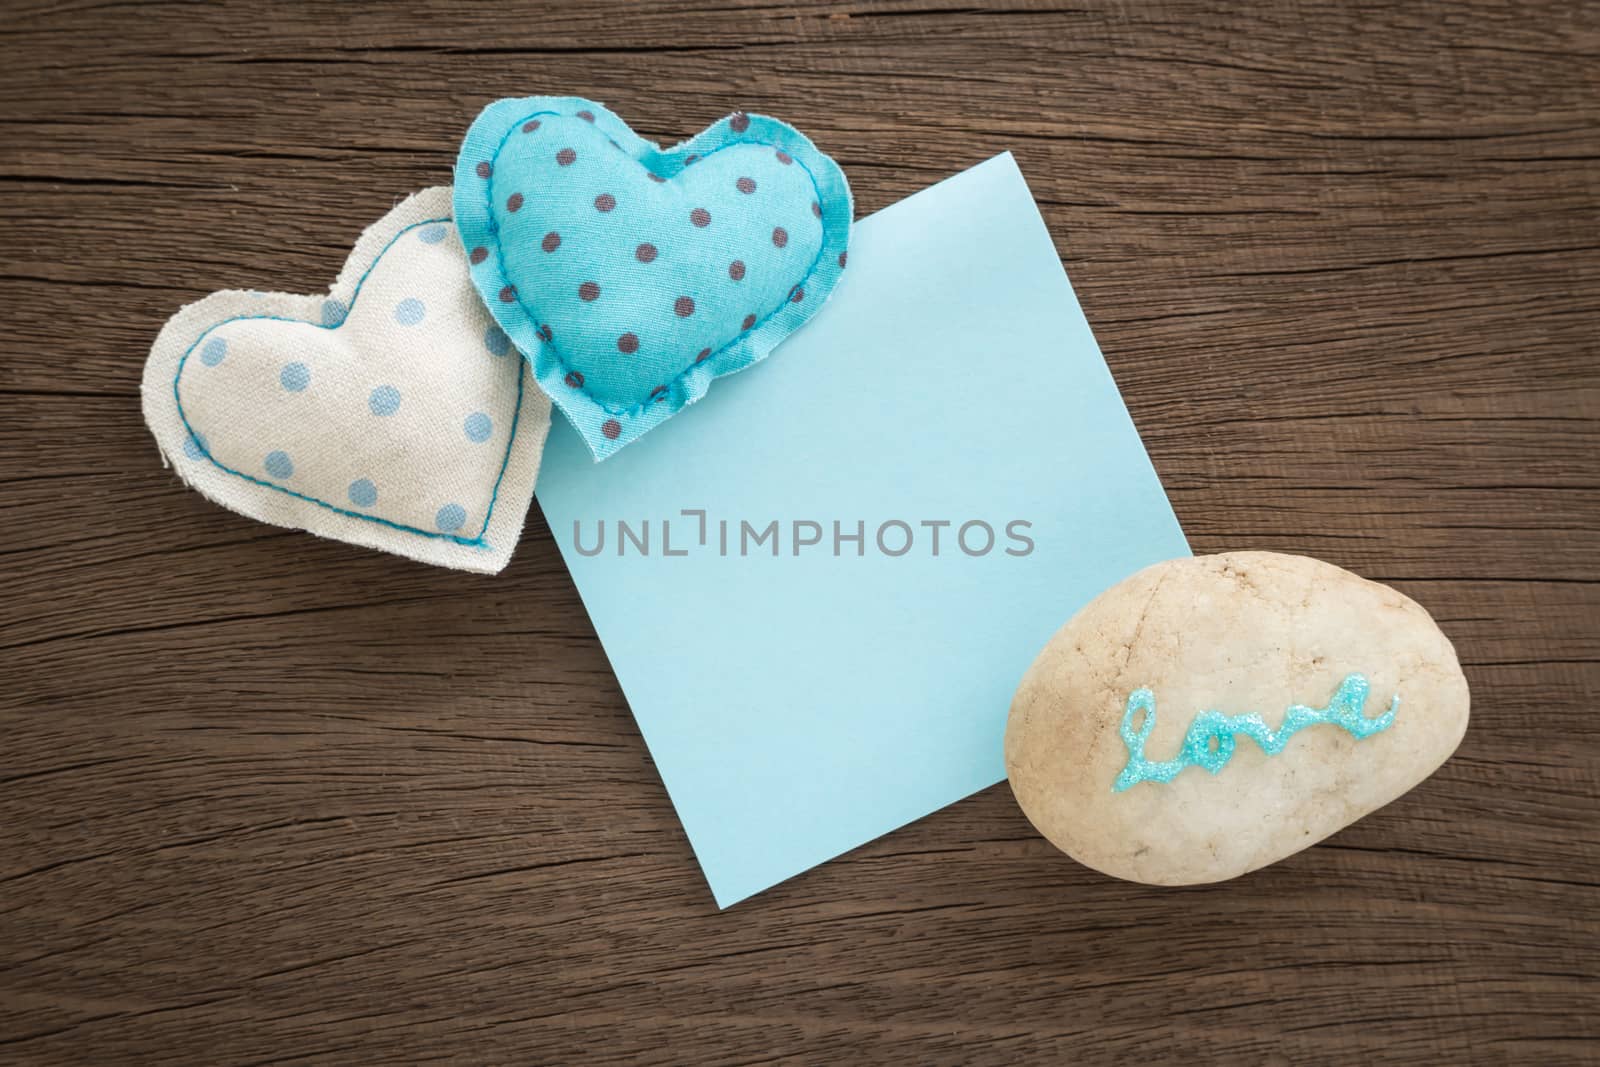 Blue hearts handmade crafts from polka dot cotton cloth with love word on pebble and blank paper note place on wood background with vignette,  anniversary and valentine's day symbol